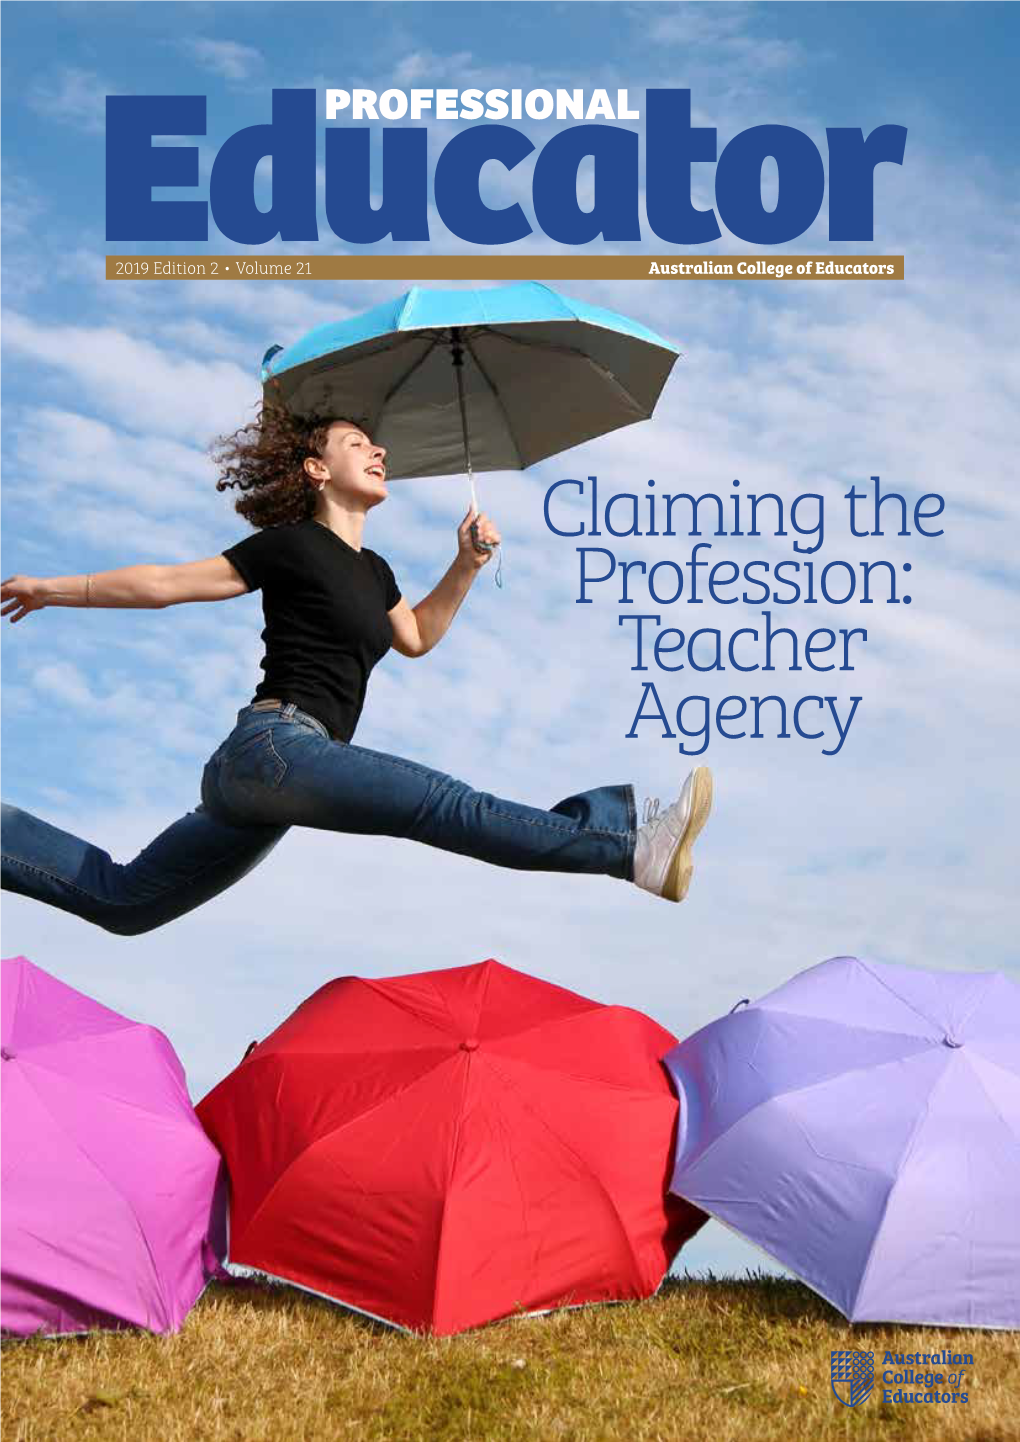 Claiming the Profession: Teacher Agency CONTENTS REGULARS 2019 Edition 2 • Volume 21 Australian College of Educators Editorial 4